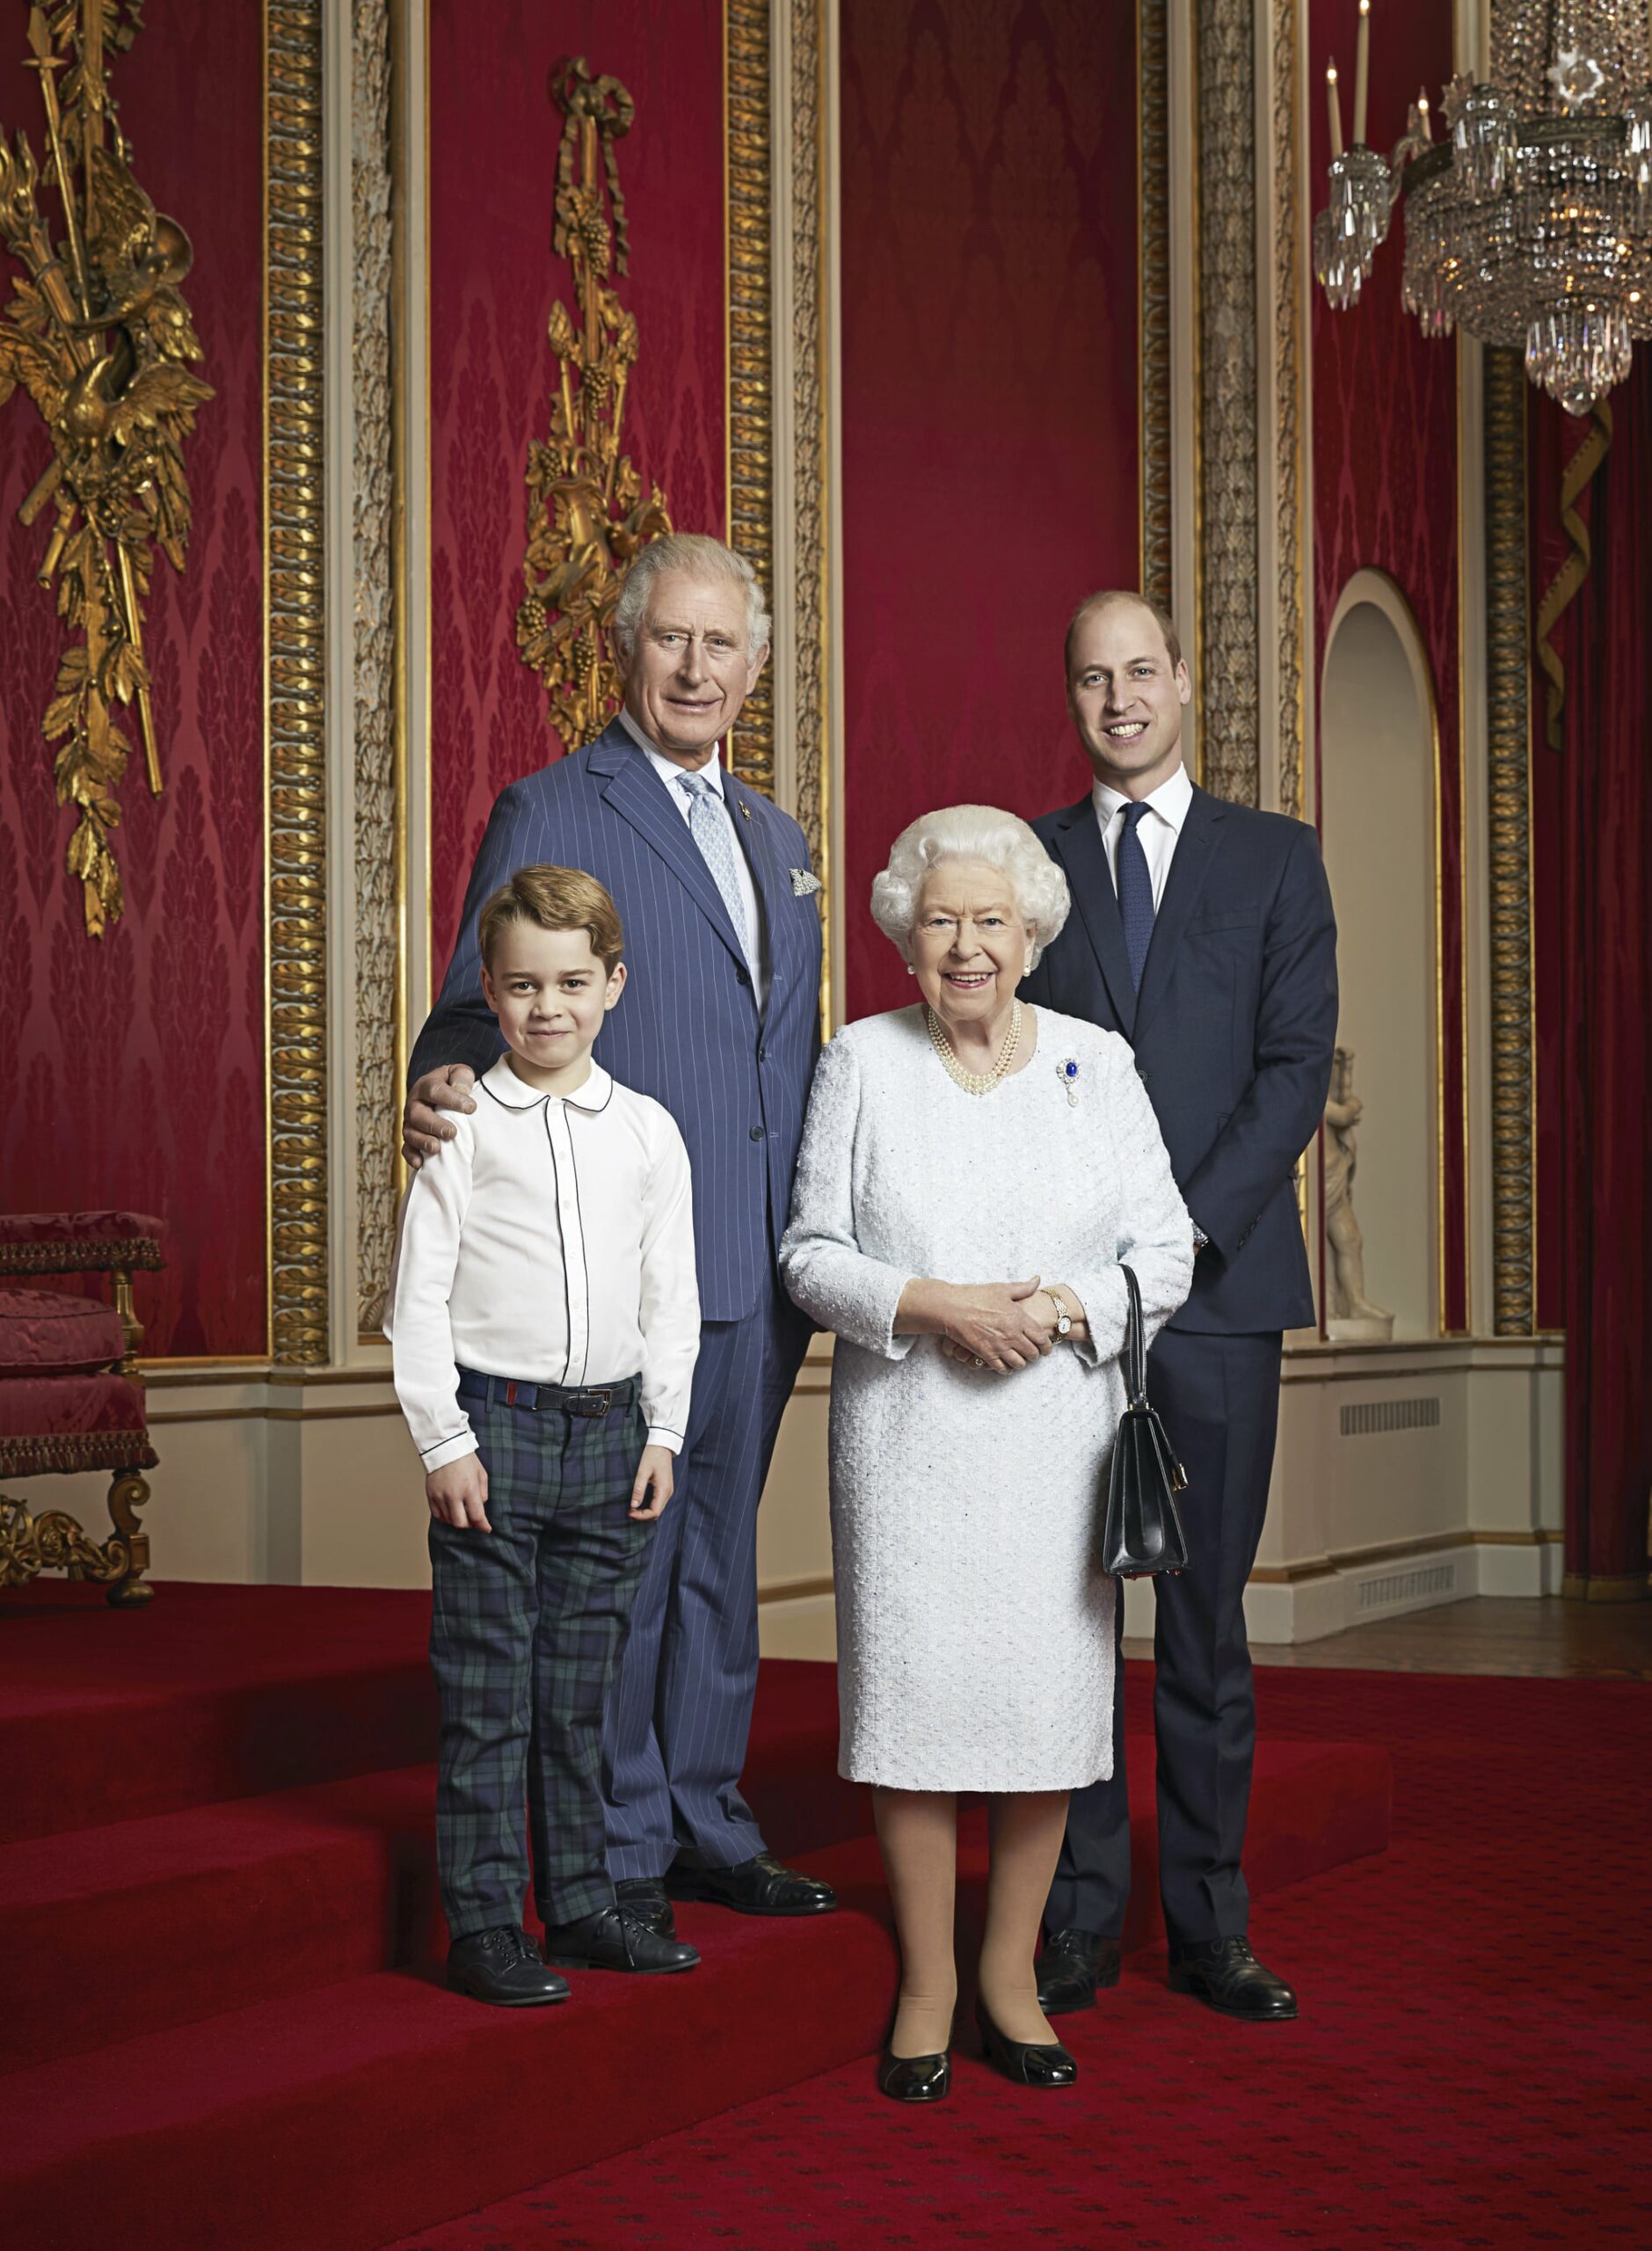 Royal Portrait. EMBARGOED UNTIL 2200 FRIDAY JANUARY 3, 2020. MANDATORY CREDIT: Ranald Mackechnie. This photograph is solely for news editorial use only; no charge should be made for the supply, release or publication of the photograph; no commercial use whatsoever of the photograph (including any use in merchandising, advertising or any other non-editorial use); not for use after 15th January 2020 without prior permission from Royal Communications. The photograph must not be digitally enhanced, manipulated or modified in any manner or form and must include all of the individuals in the photograph when published. This new portrait of Queen Elizabeth II, the Prince of Wales, the Duke of Cambridge and Prince George has been released to mark the start of a new decade. This is only the second time such a portrait has been issued. The first was released in April 2016 to celebrate Her Majesty